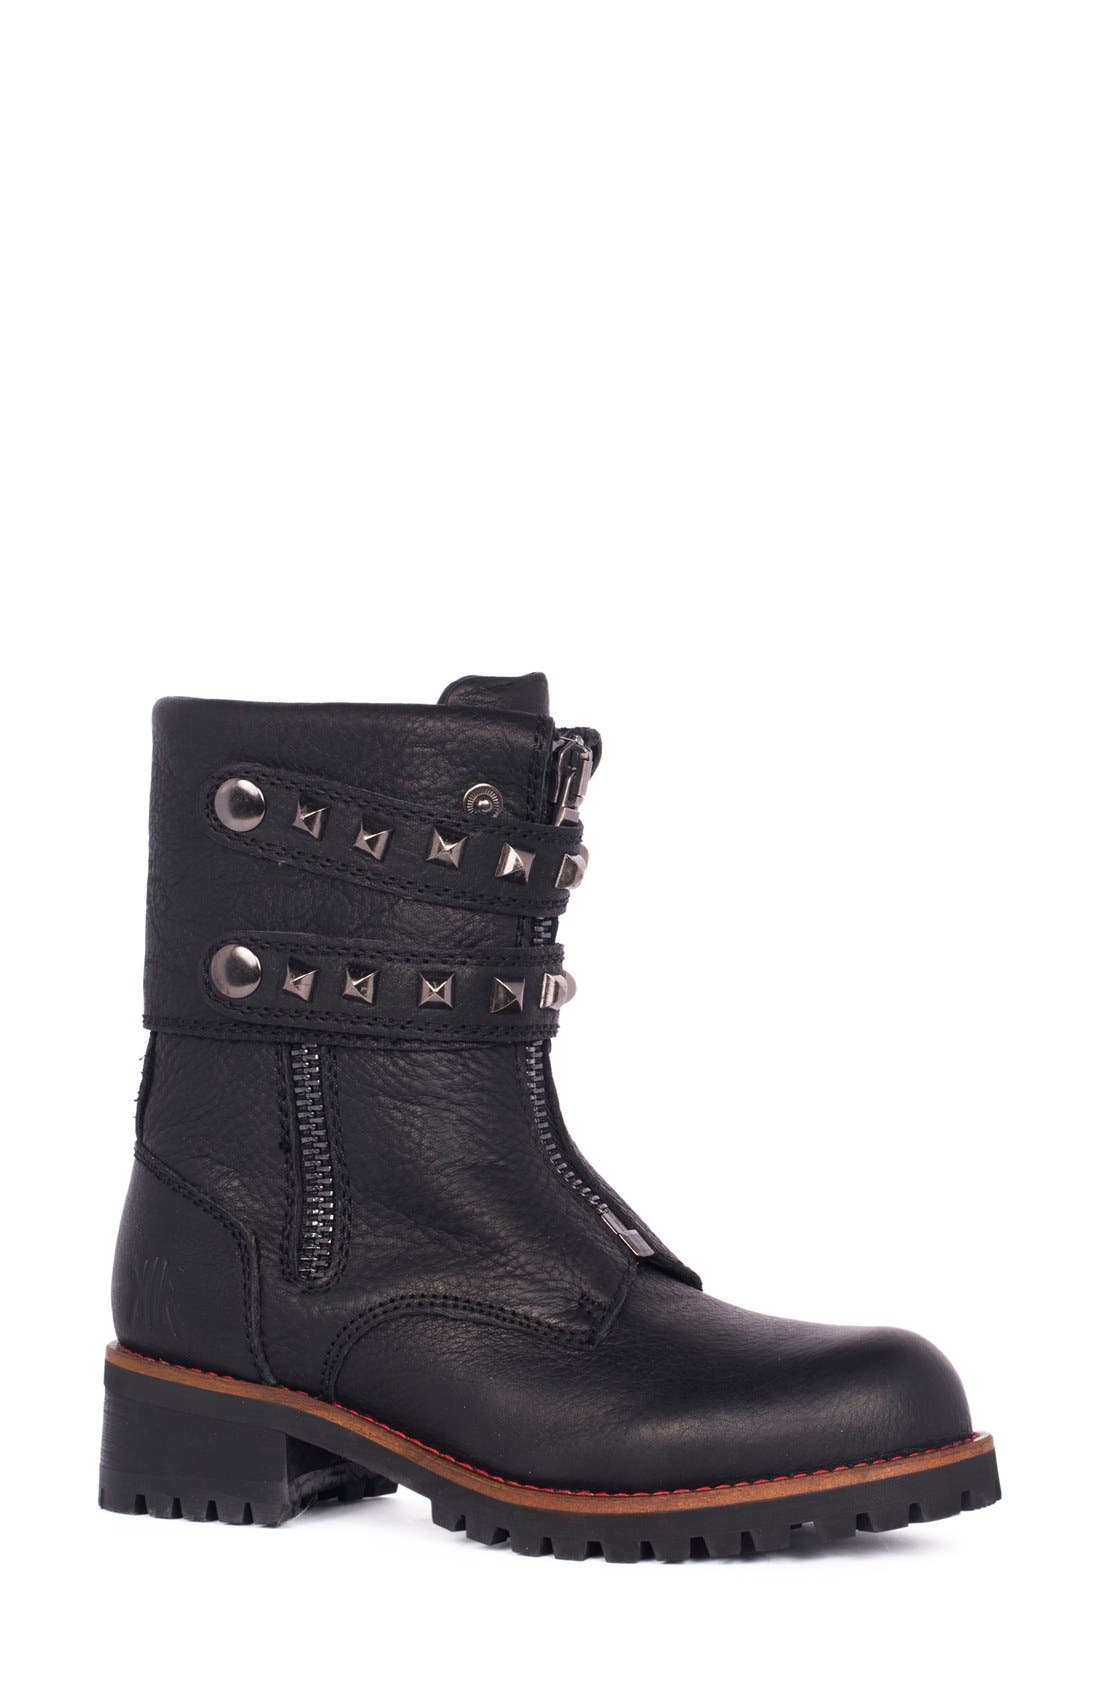 nordstrom motorcycle boots